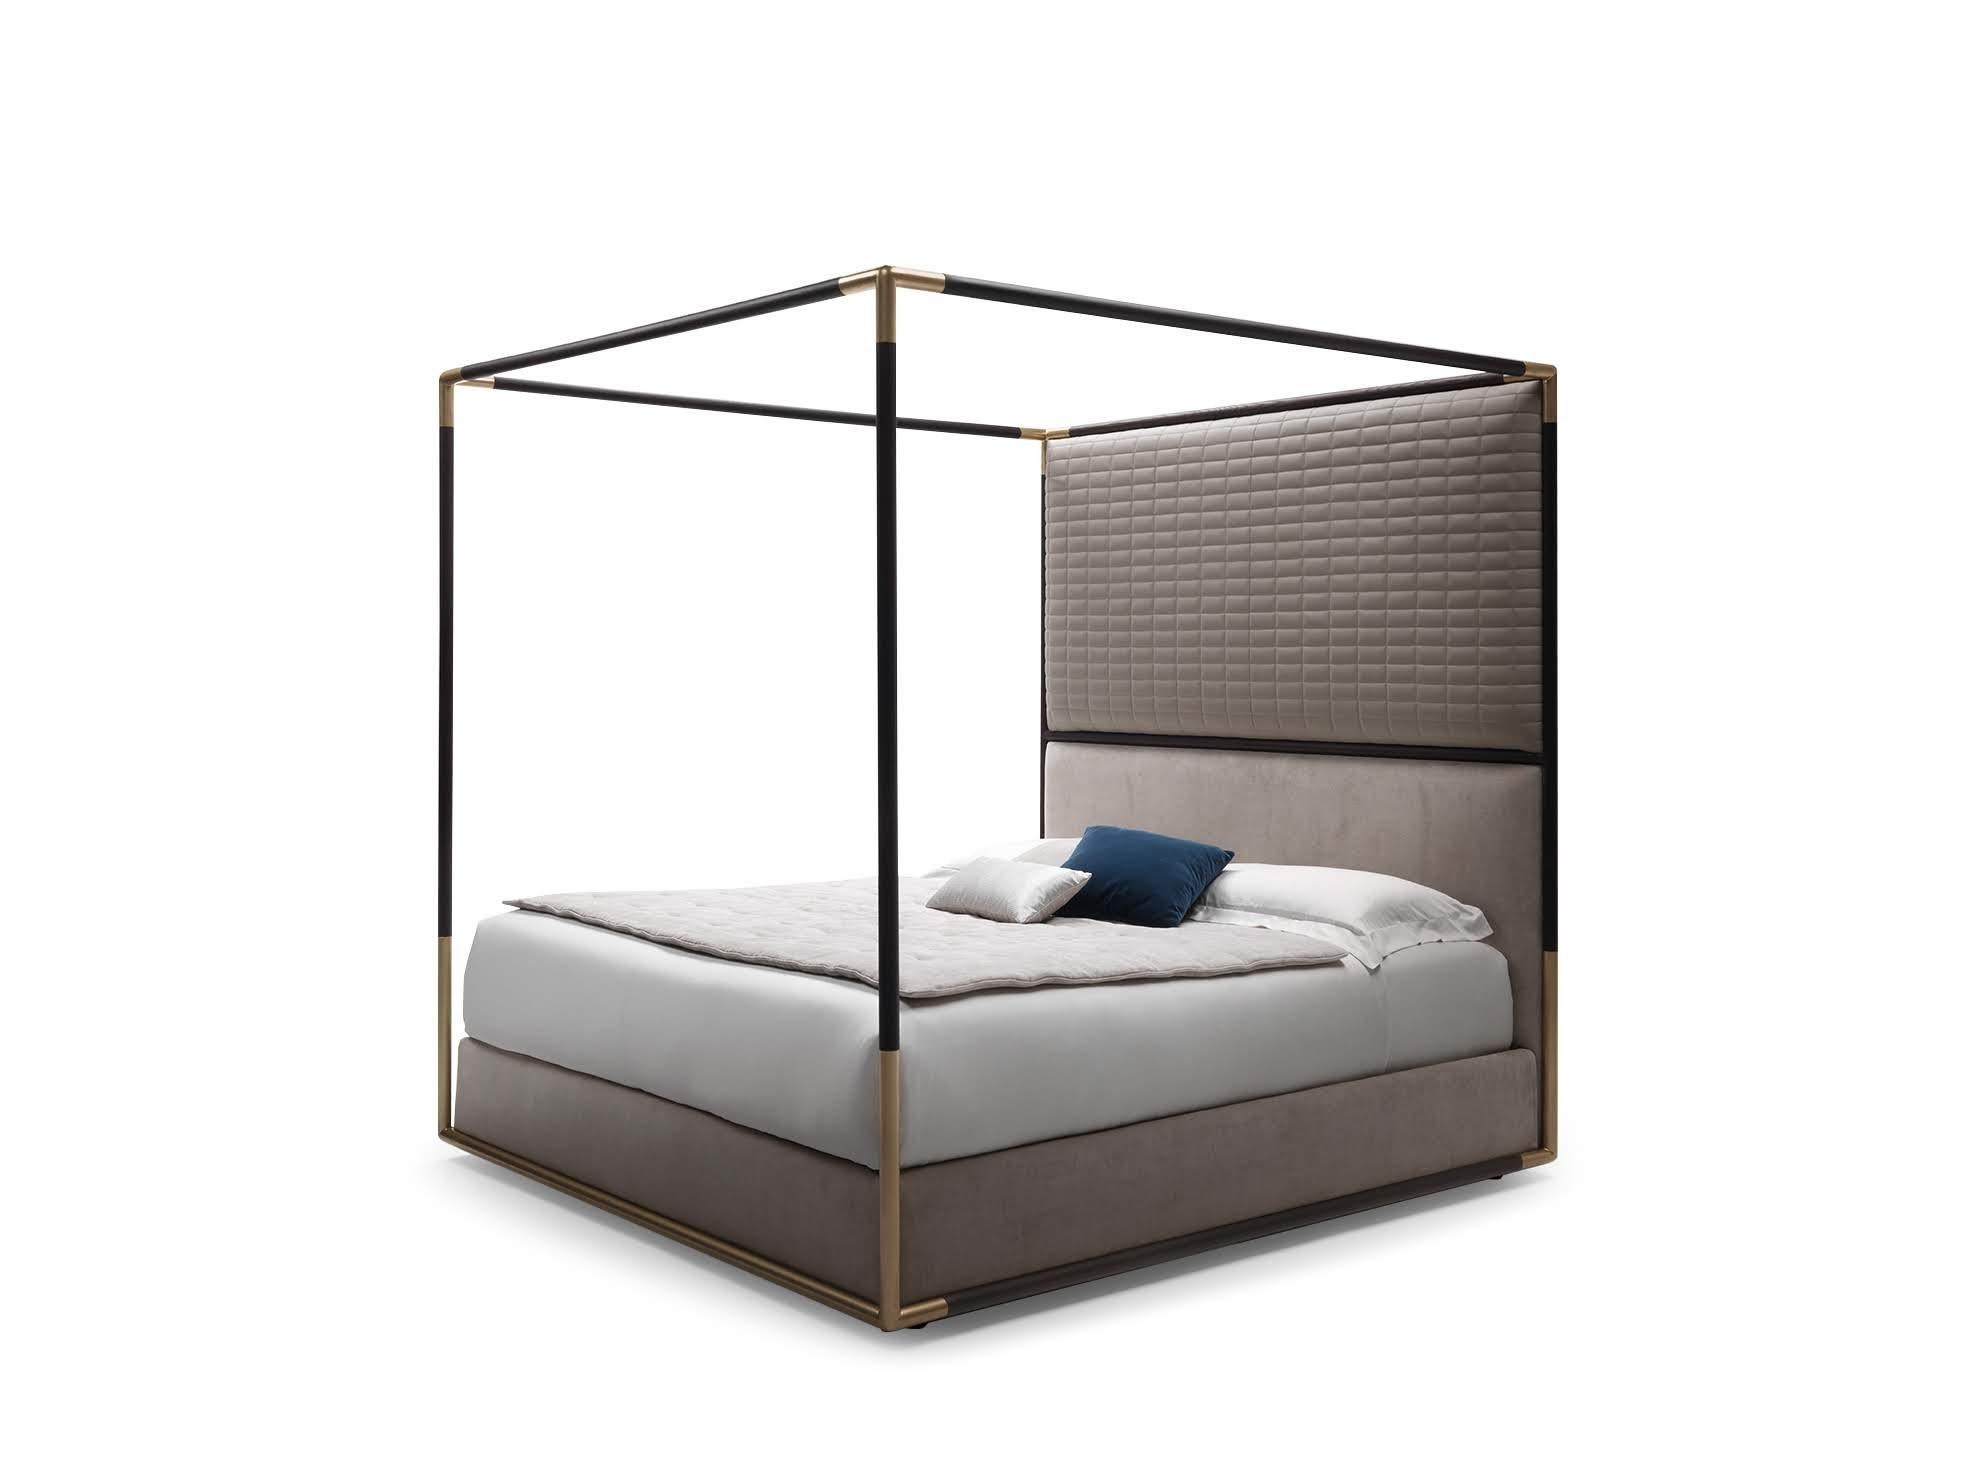 Stardust is a collection of products in which the bed and the four poster bed play a main role, capable to confer an anti-conventional note, of modern decoration, to the night area. Products of refined elegance that combine the formal strictness and